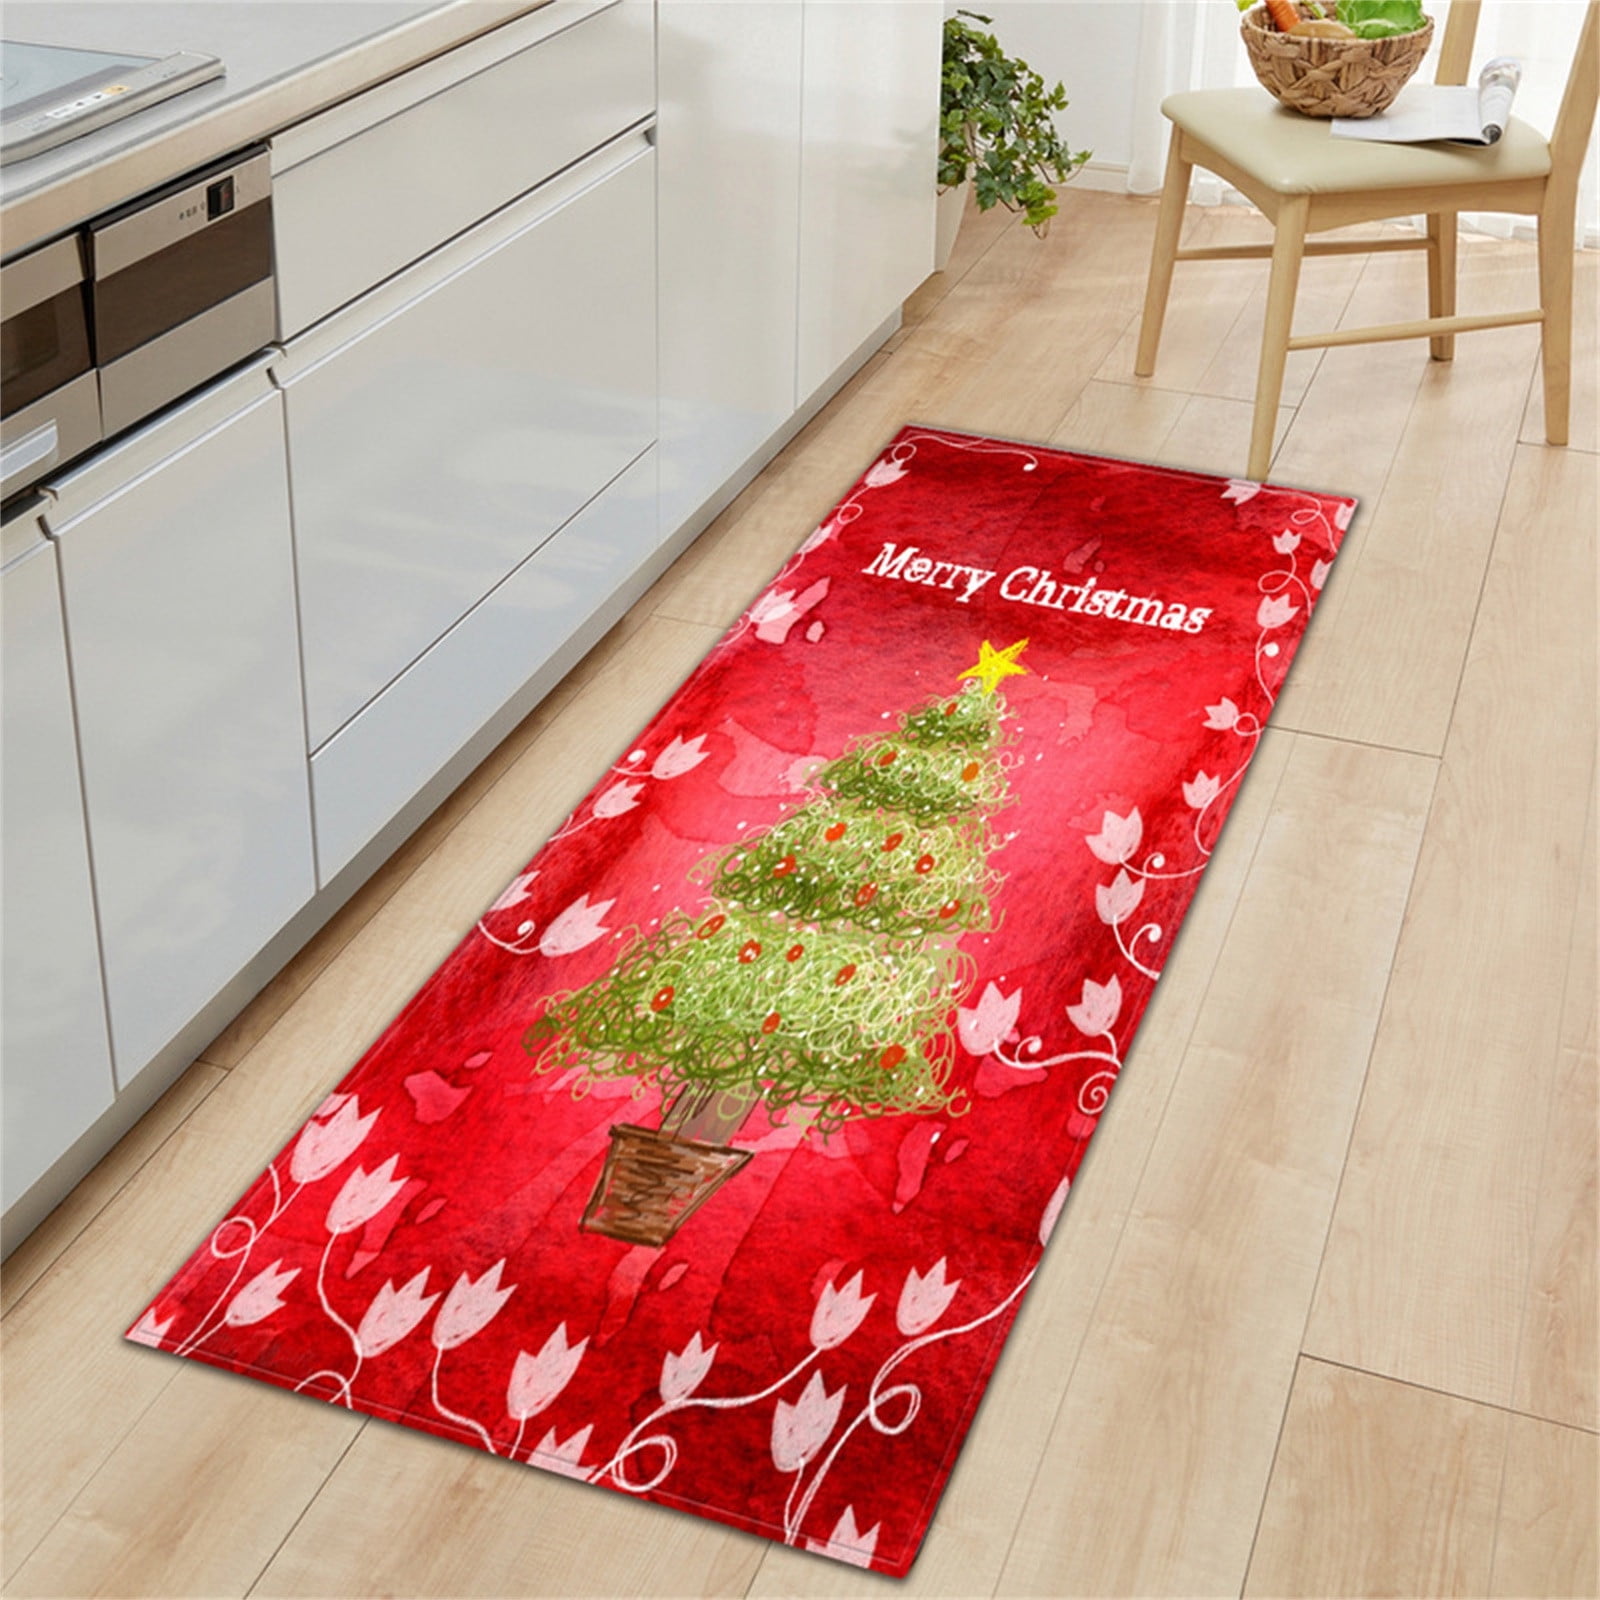 Christmas Snowman Rug, 3x4 Rug, Washable Rugs for Entryway Living Room  Bedroom, Small Area Rug, Non Slip Soft Low Pile Indoor Door Mat Carpet &  Home